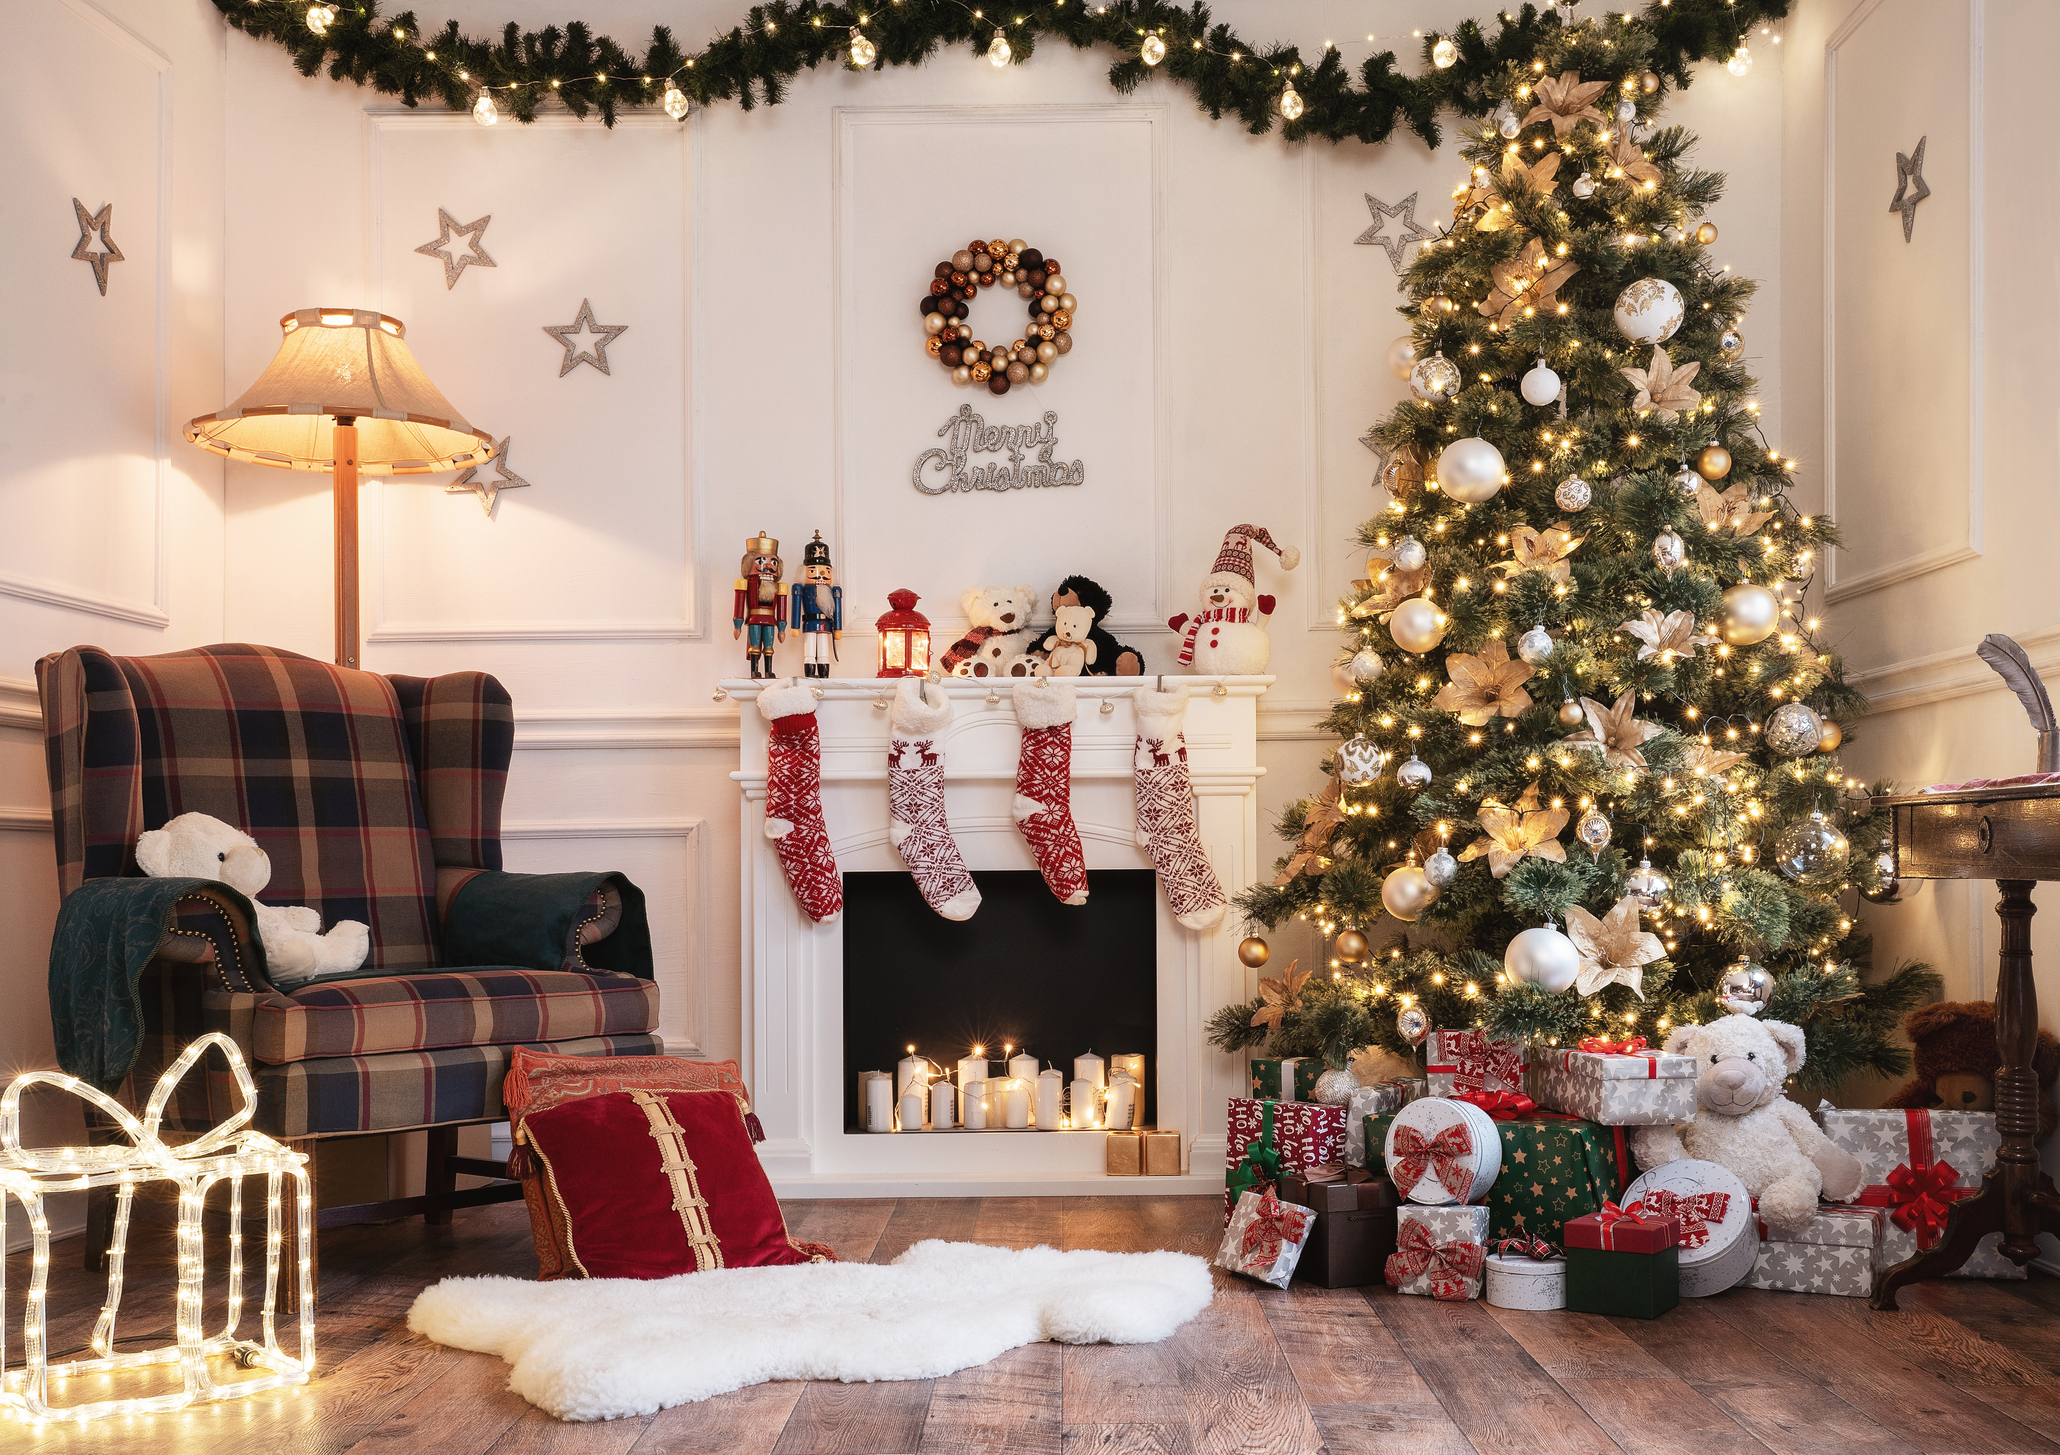 Festive Cheer on a Budget: Transforming Your Home into a Christmas Wonderland